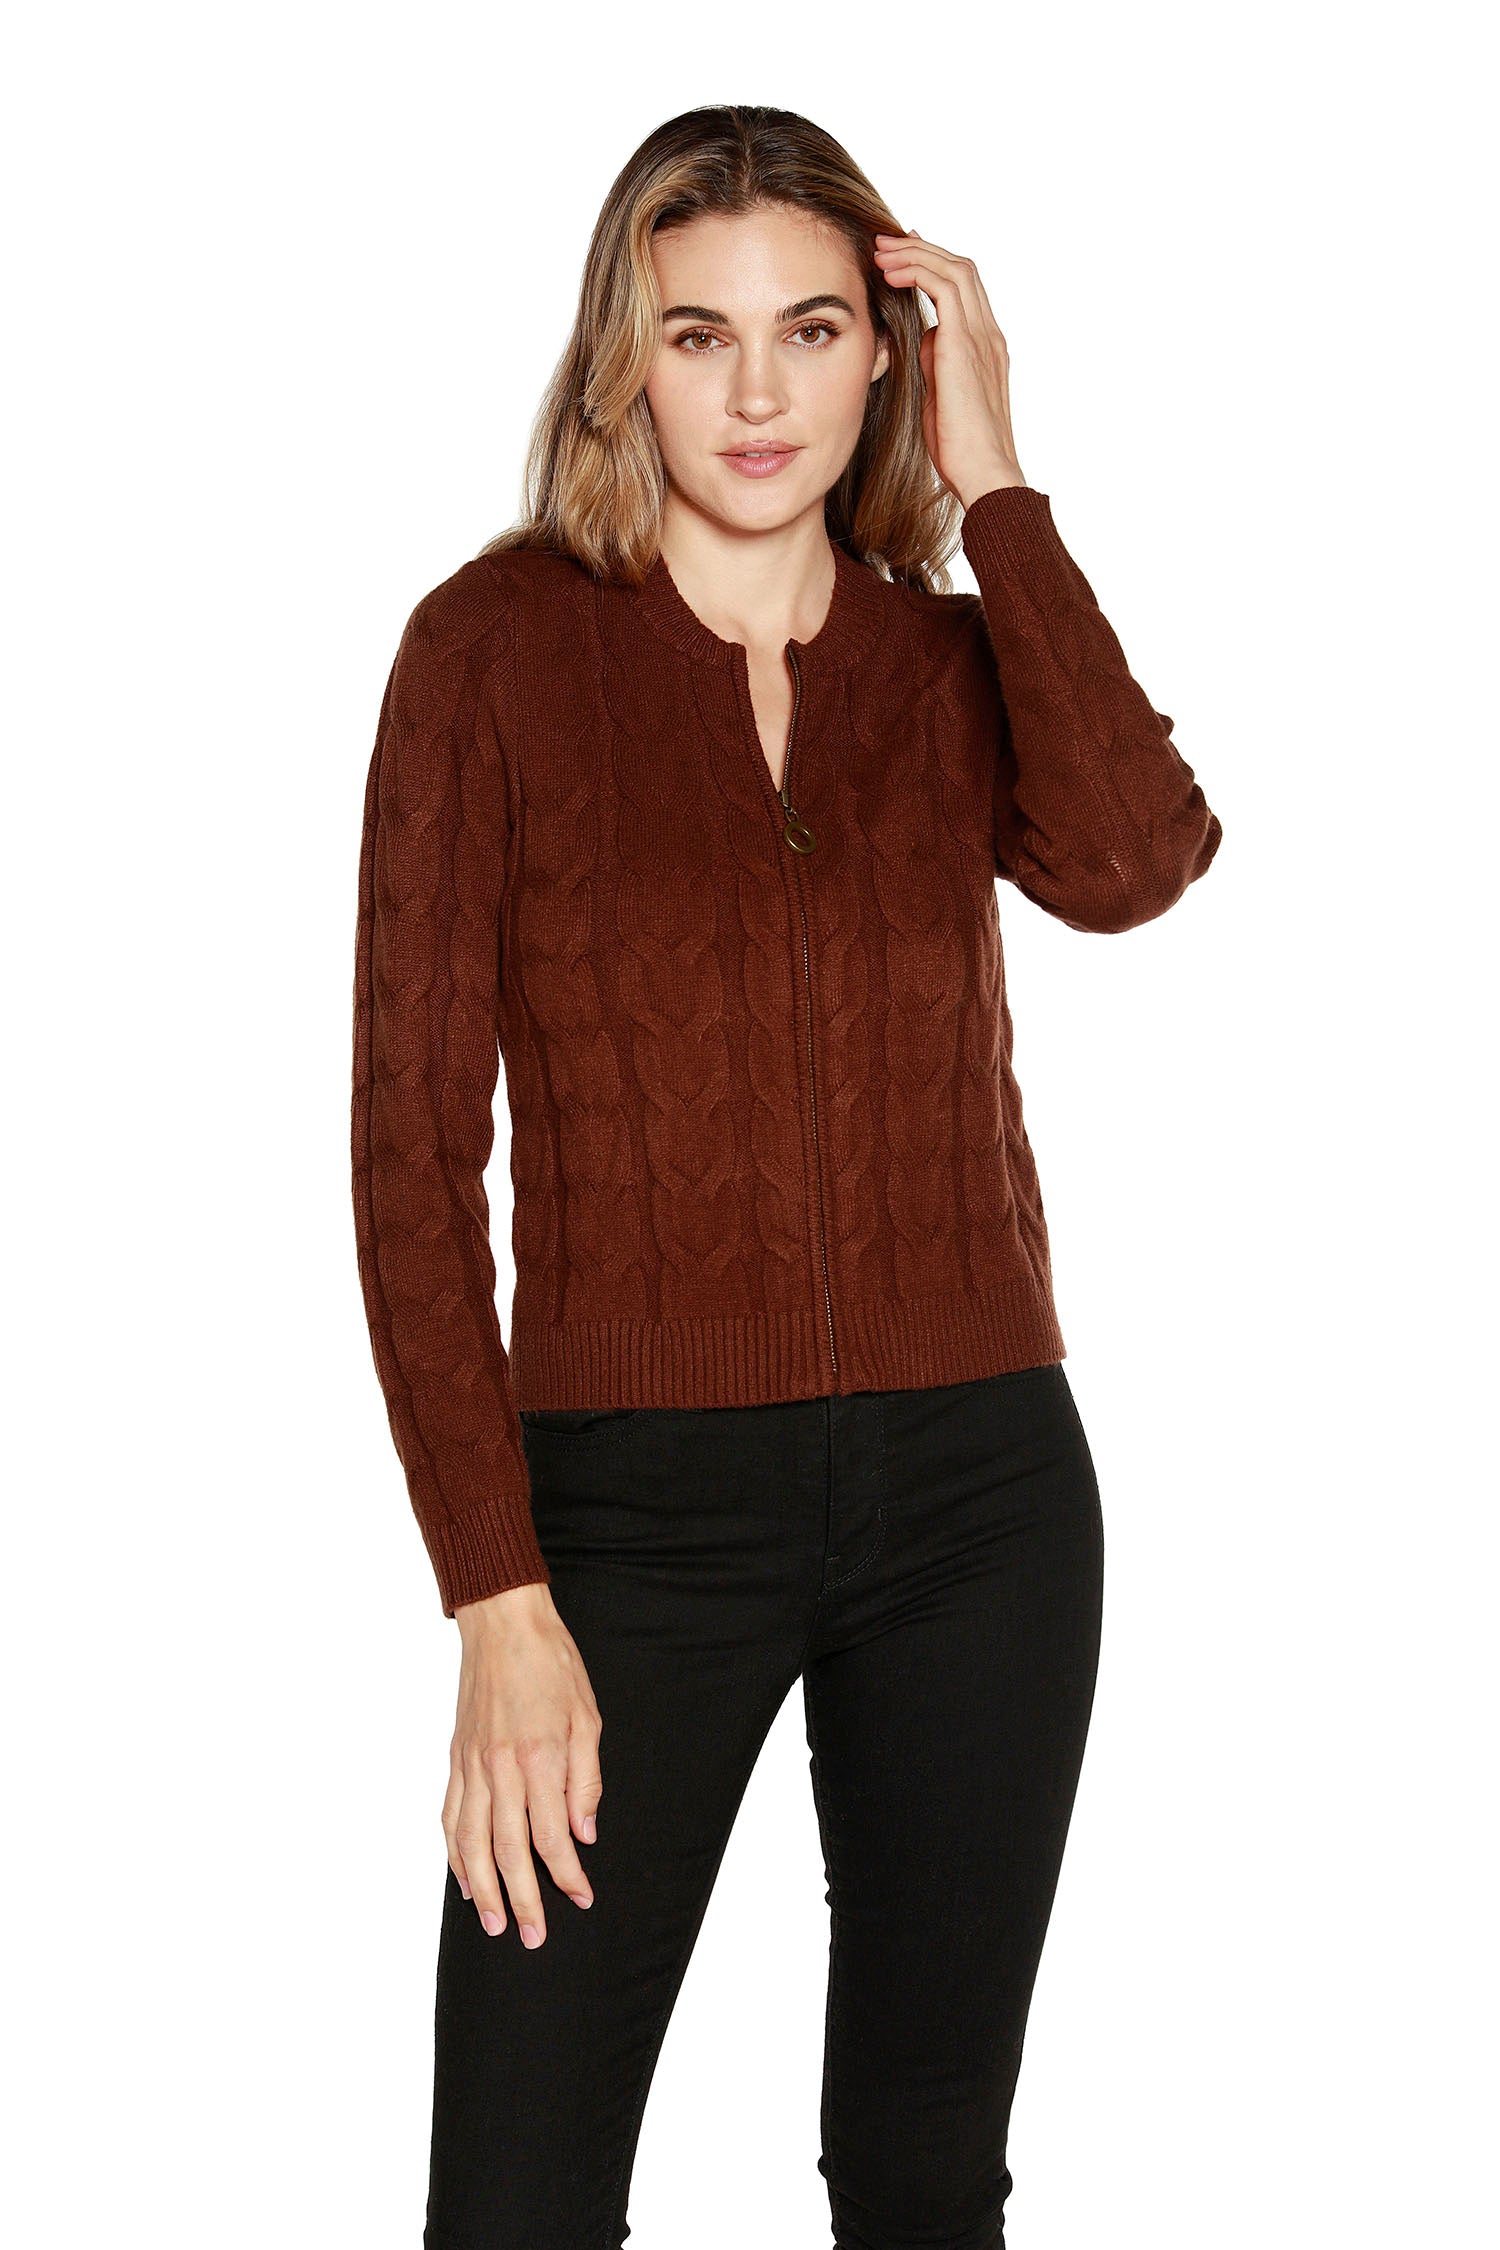 NEW COLORS Women's Cable Knit Zip Up Cardigan